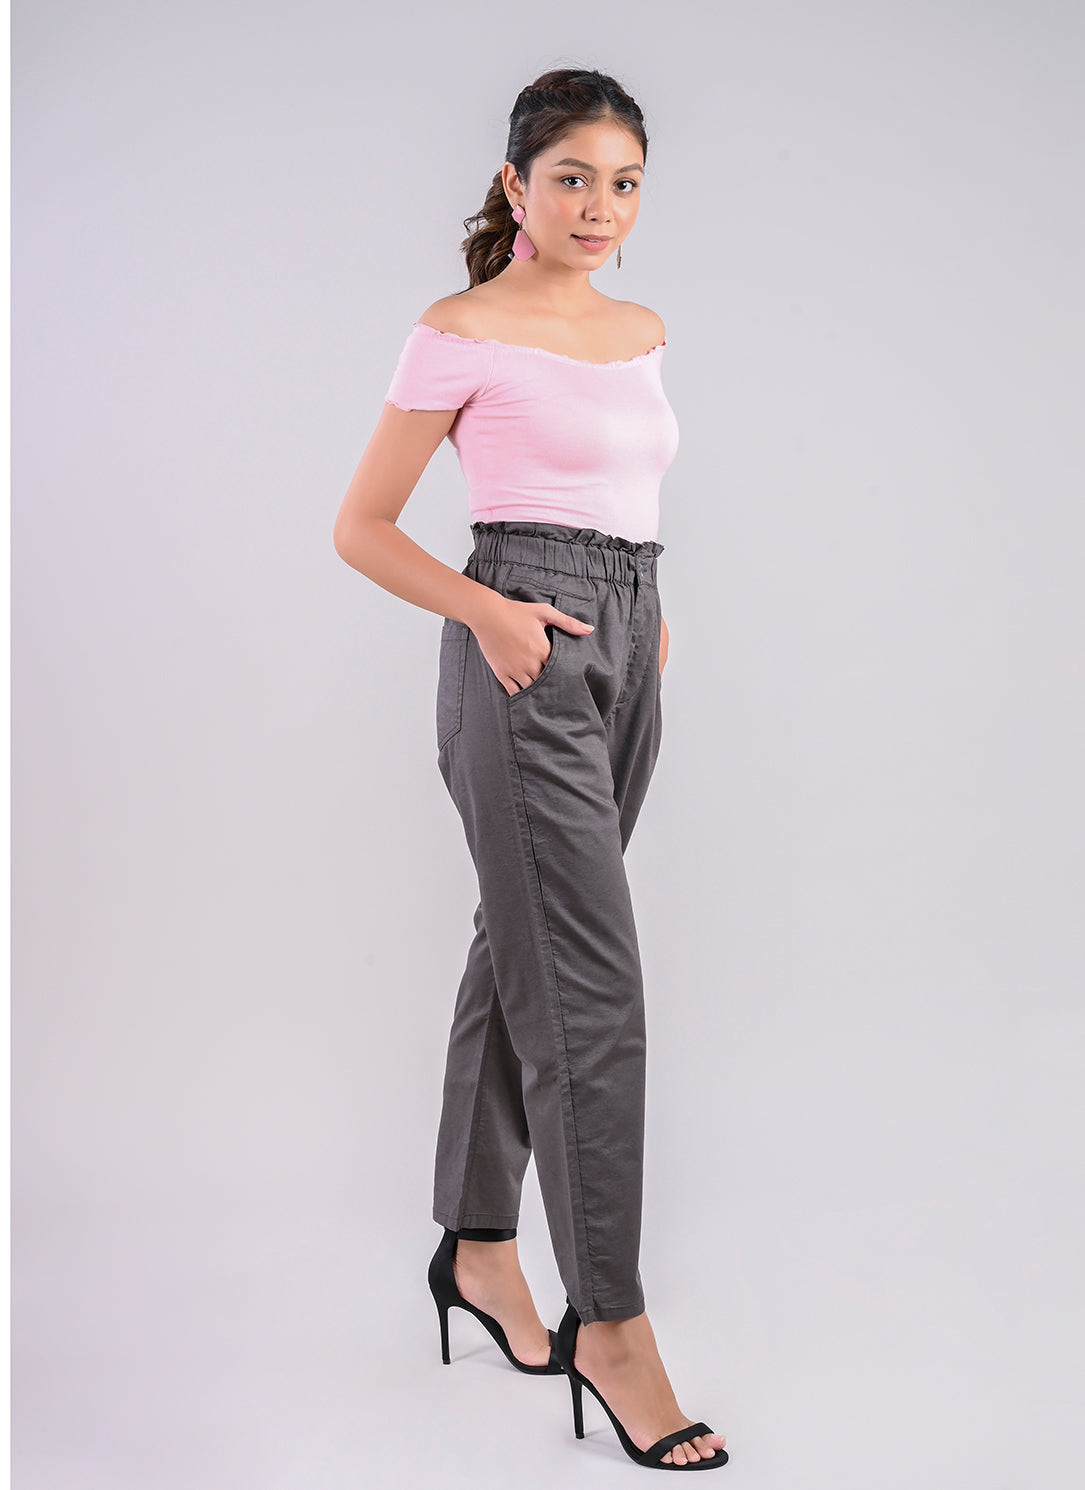 BREEZY PANTS IN GREY WITH PAPERBAG WAIST